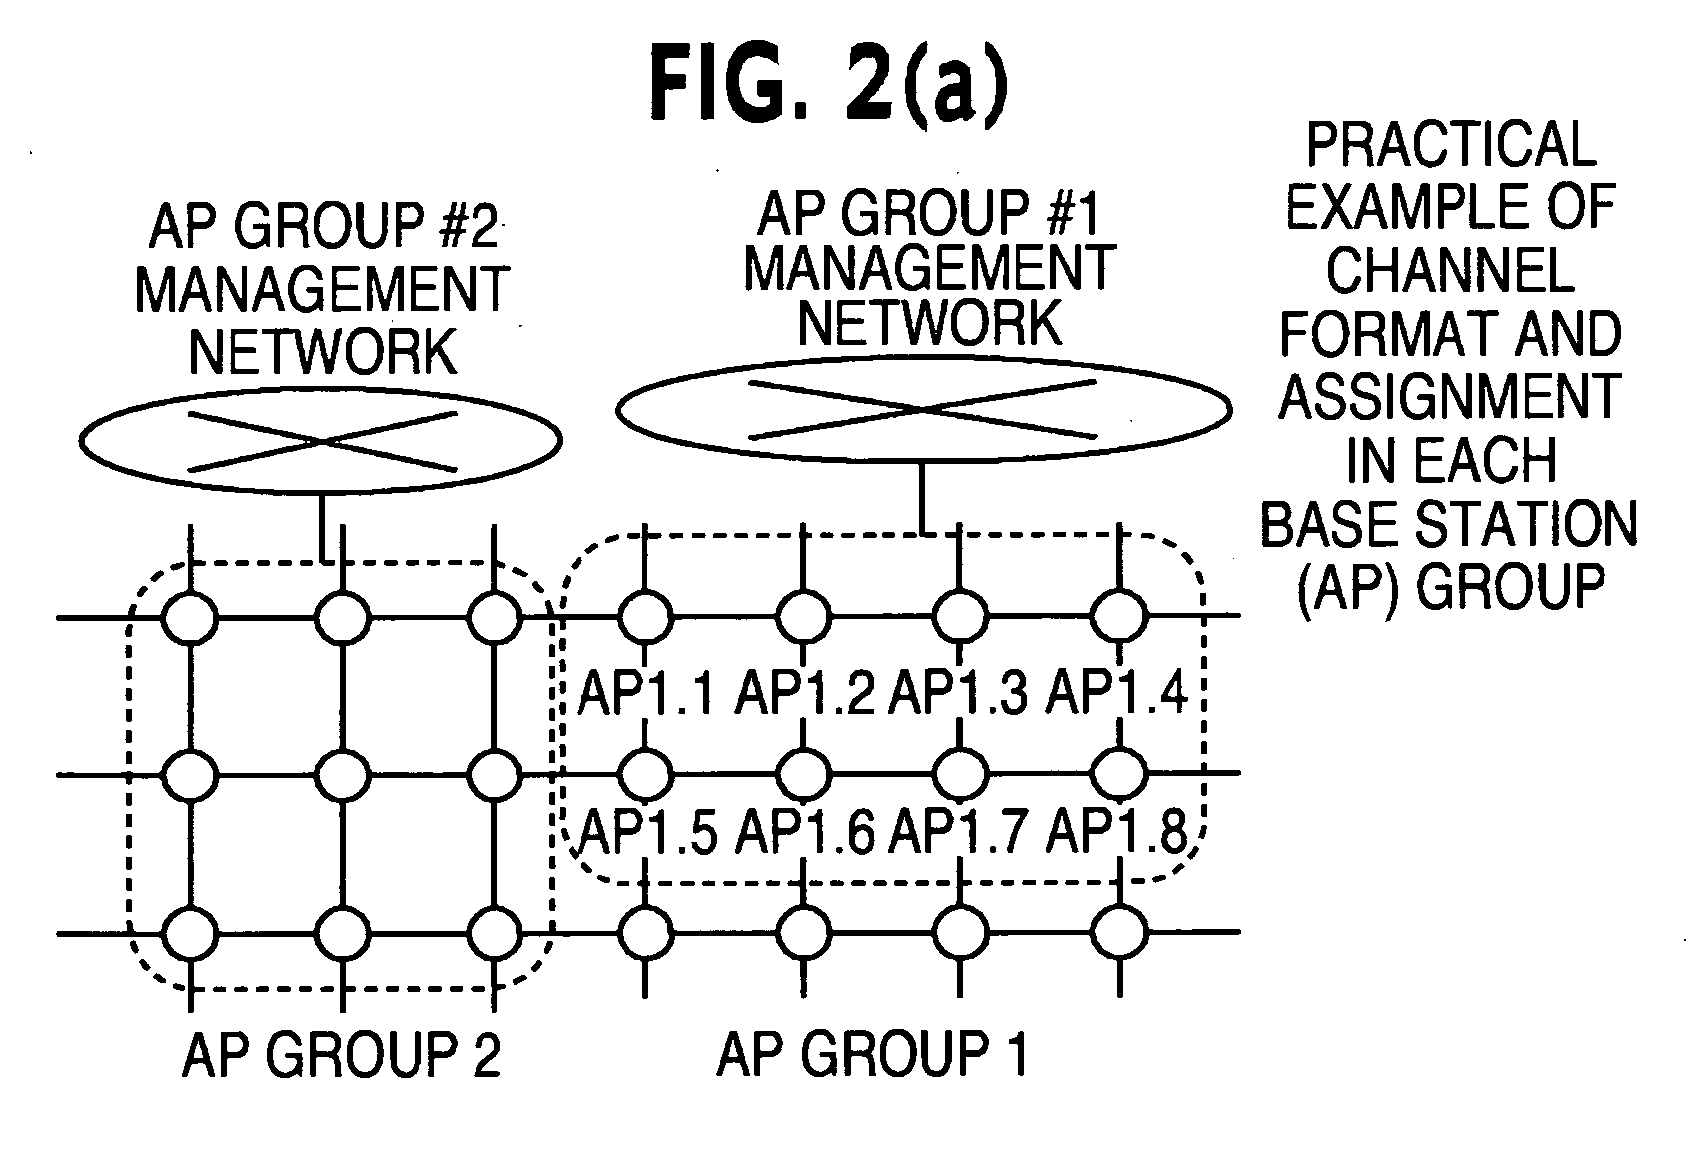 Channel assigning method and system for radio base station group